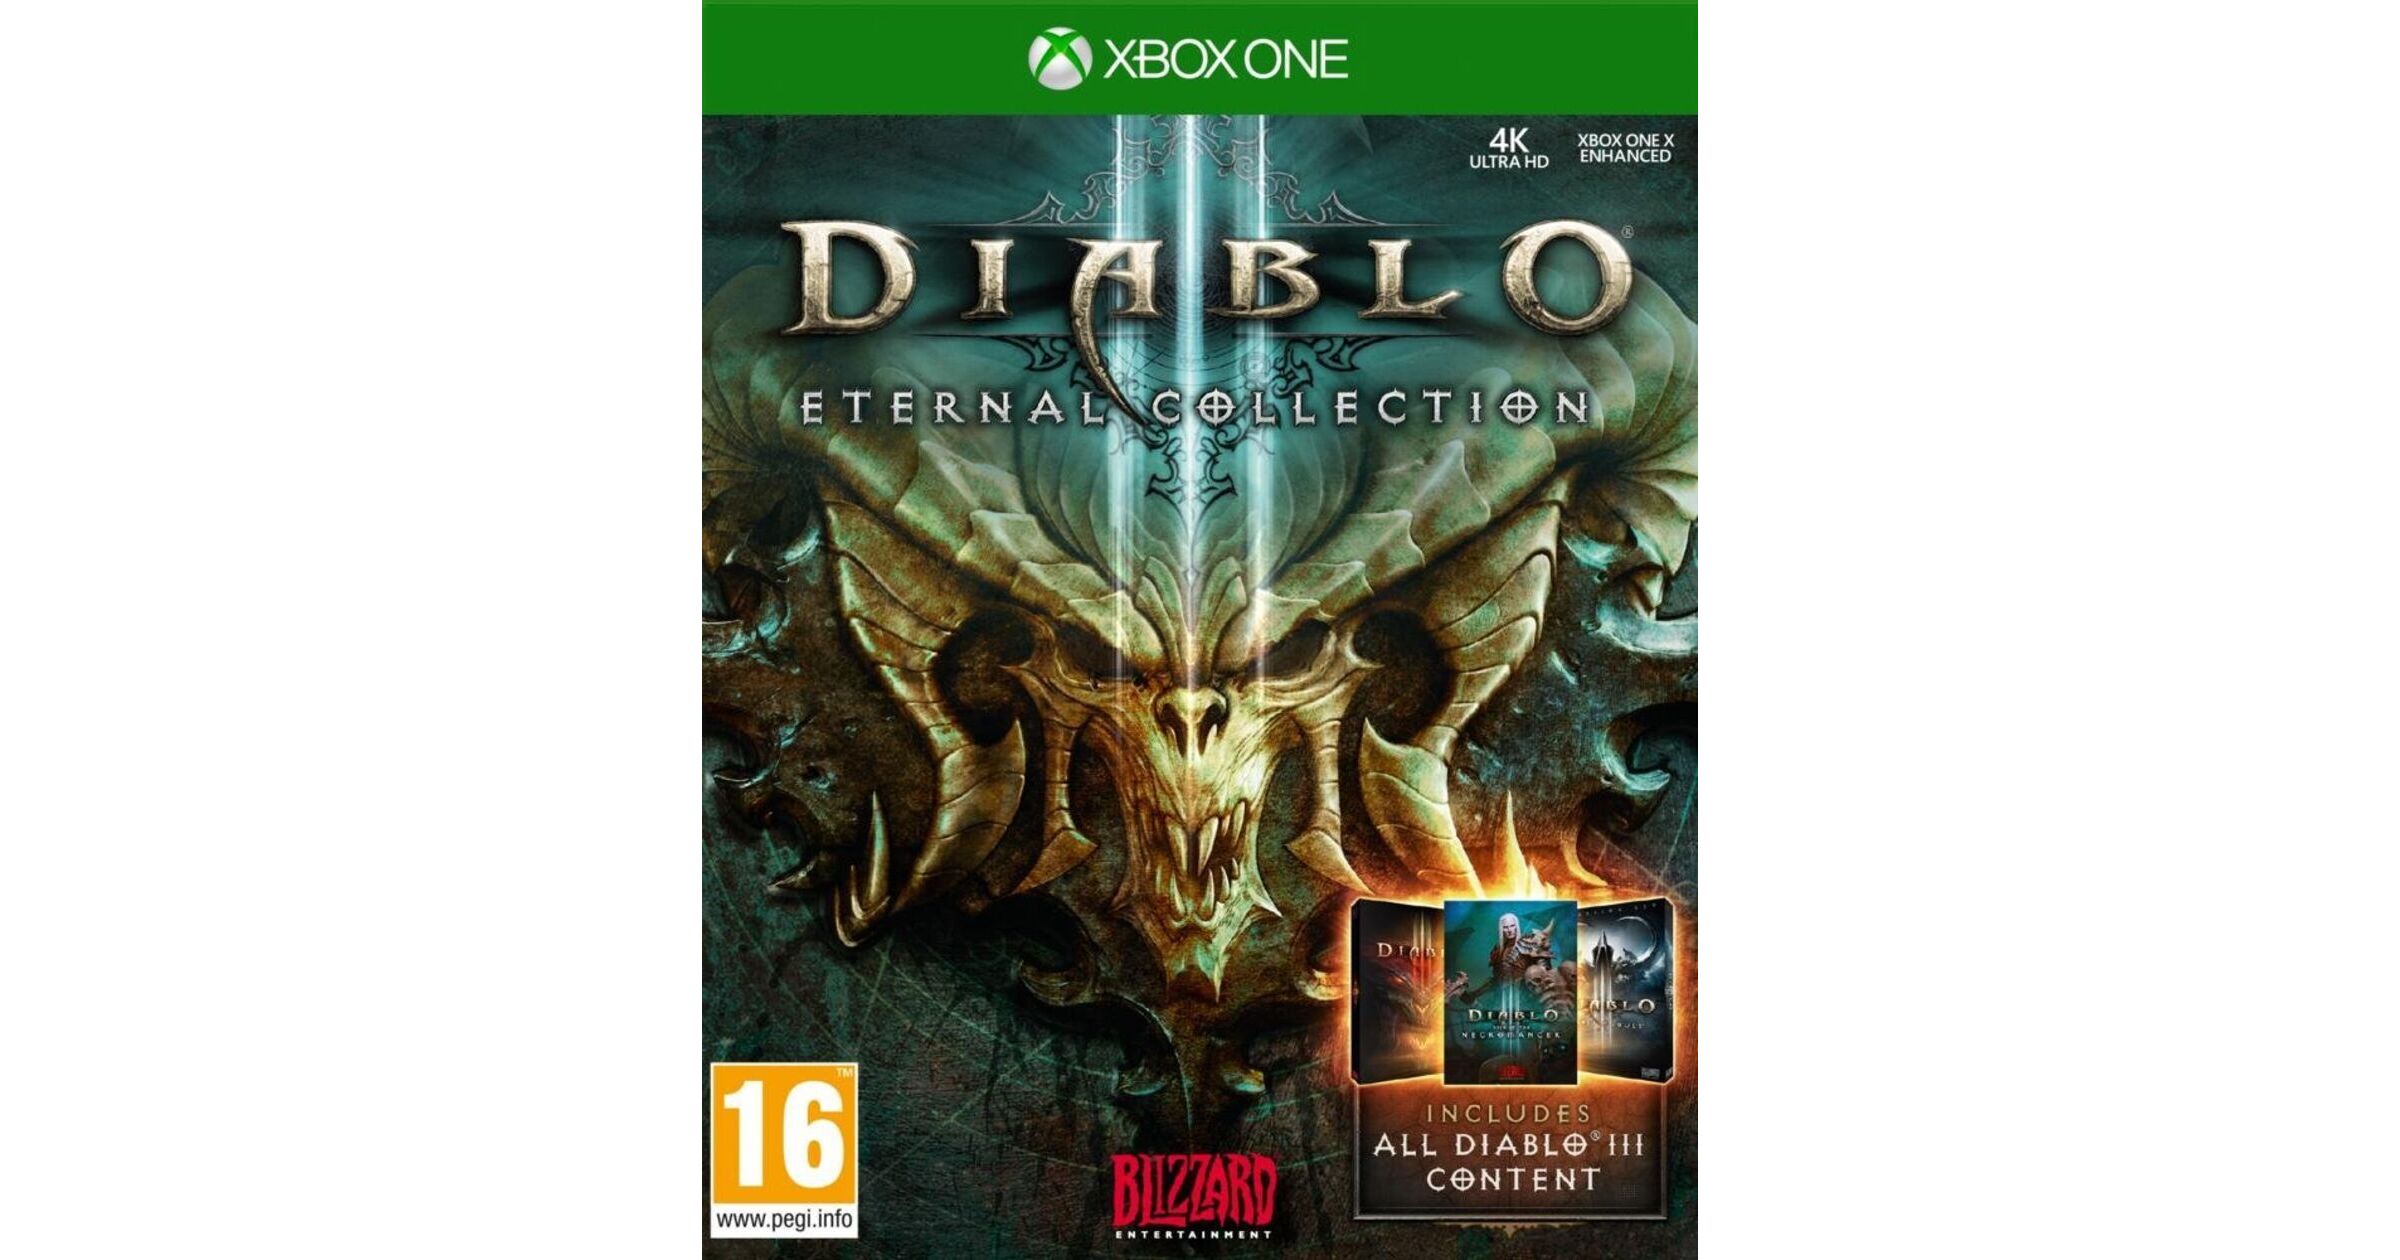 diablo 3 eternal collection xbox one x review